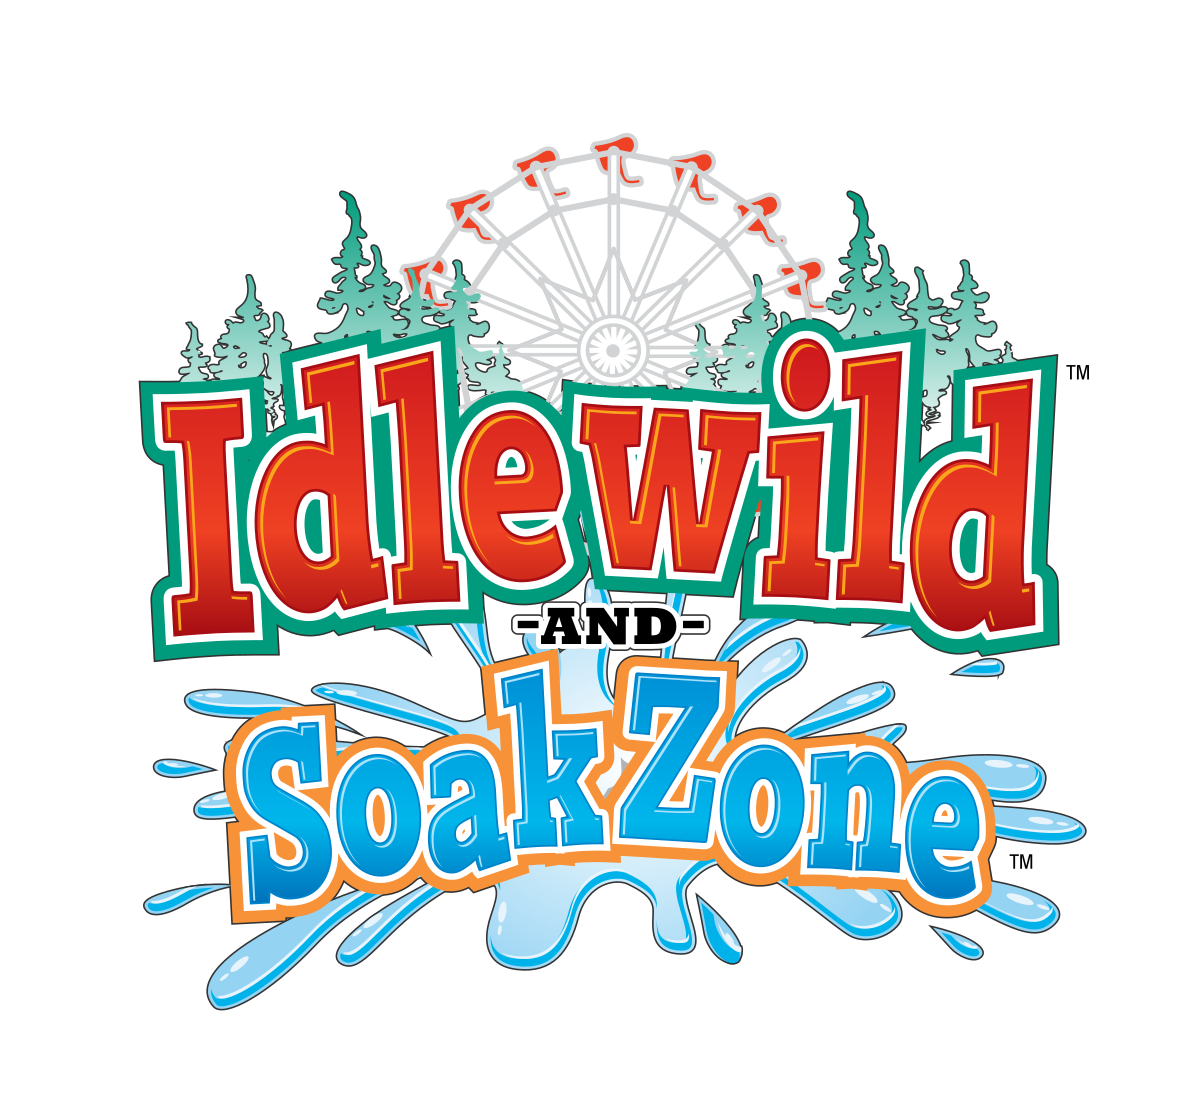 January 2020 Member of the Month-Idlewild and SoakZone